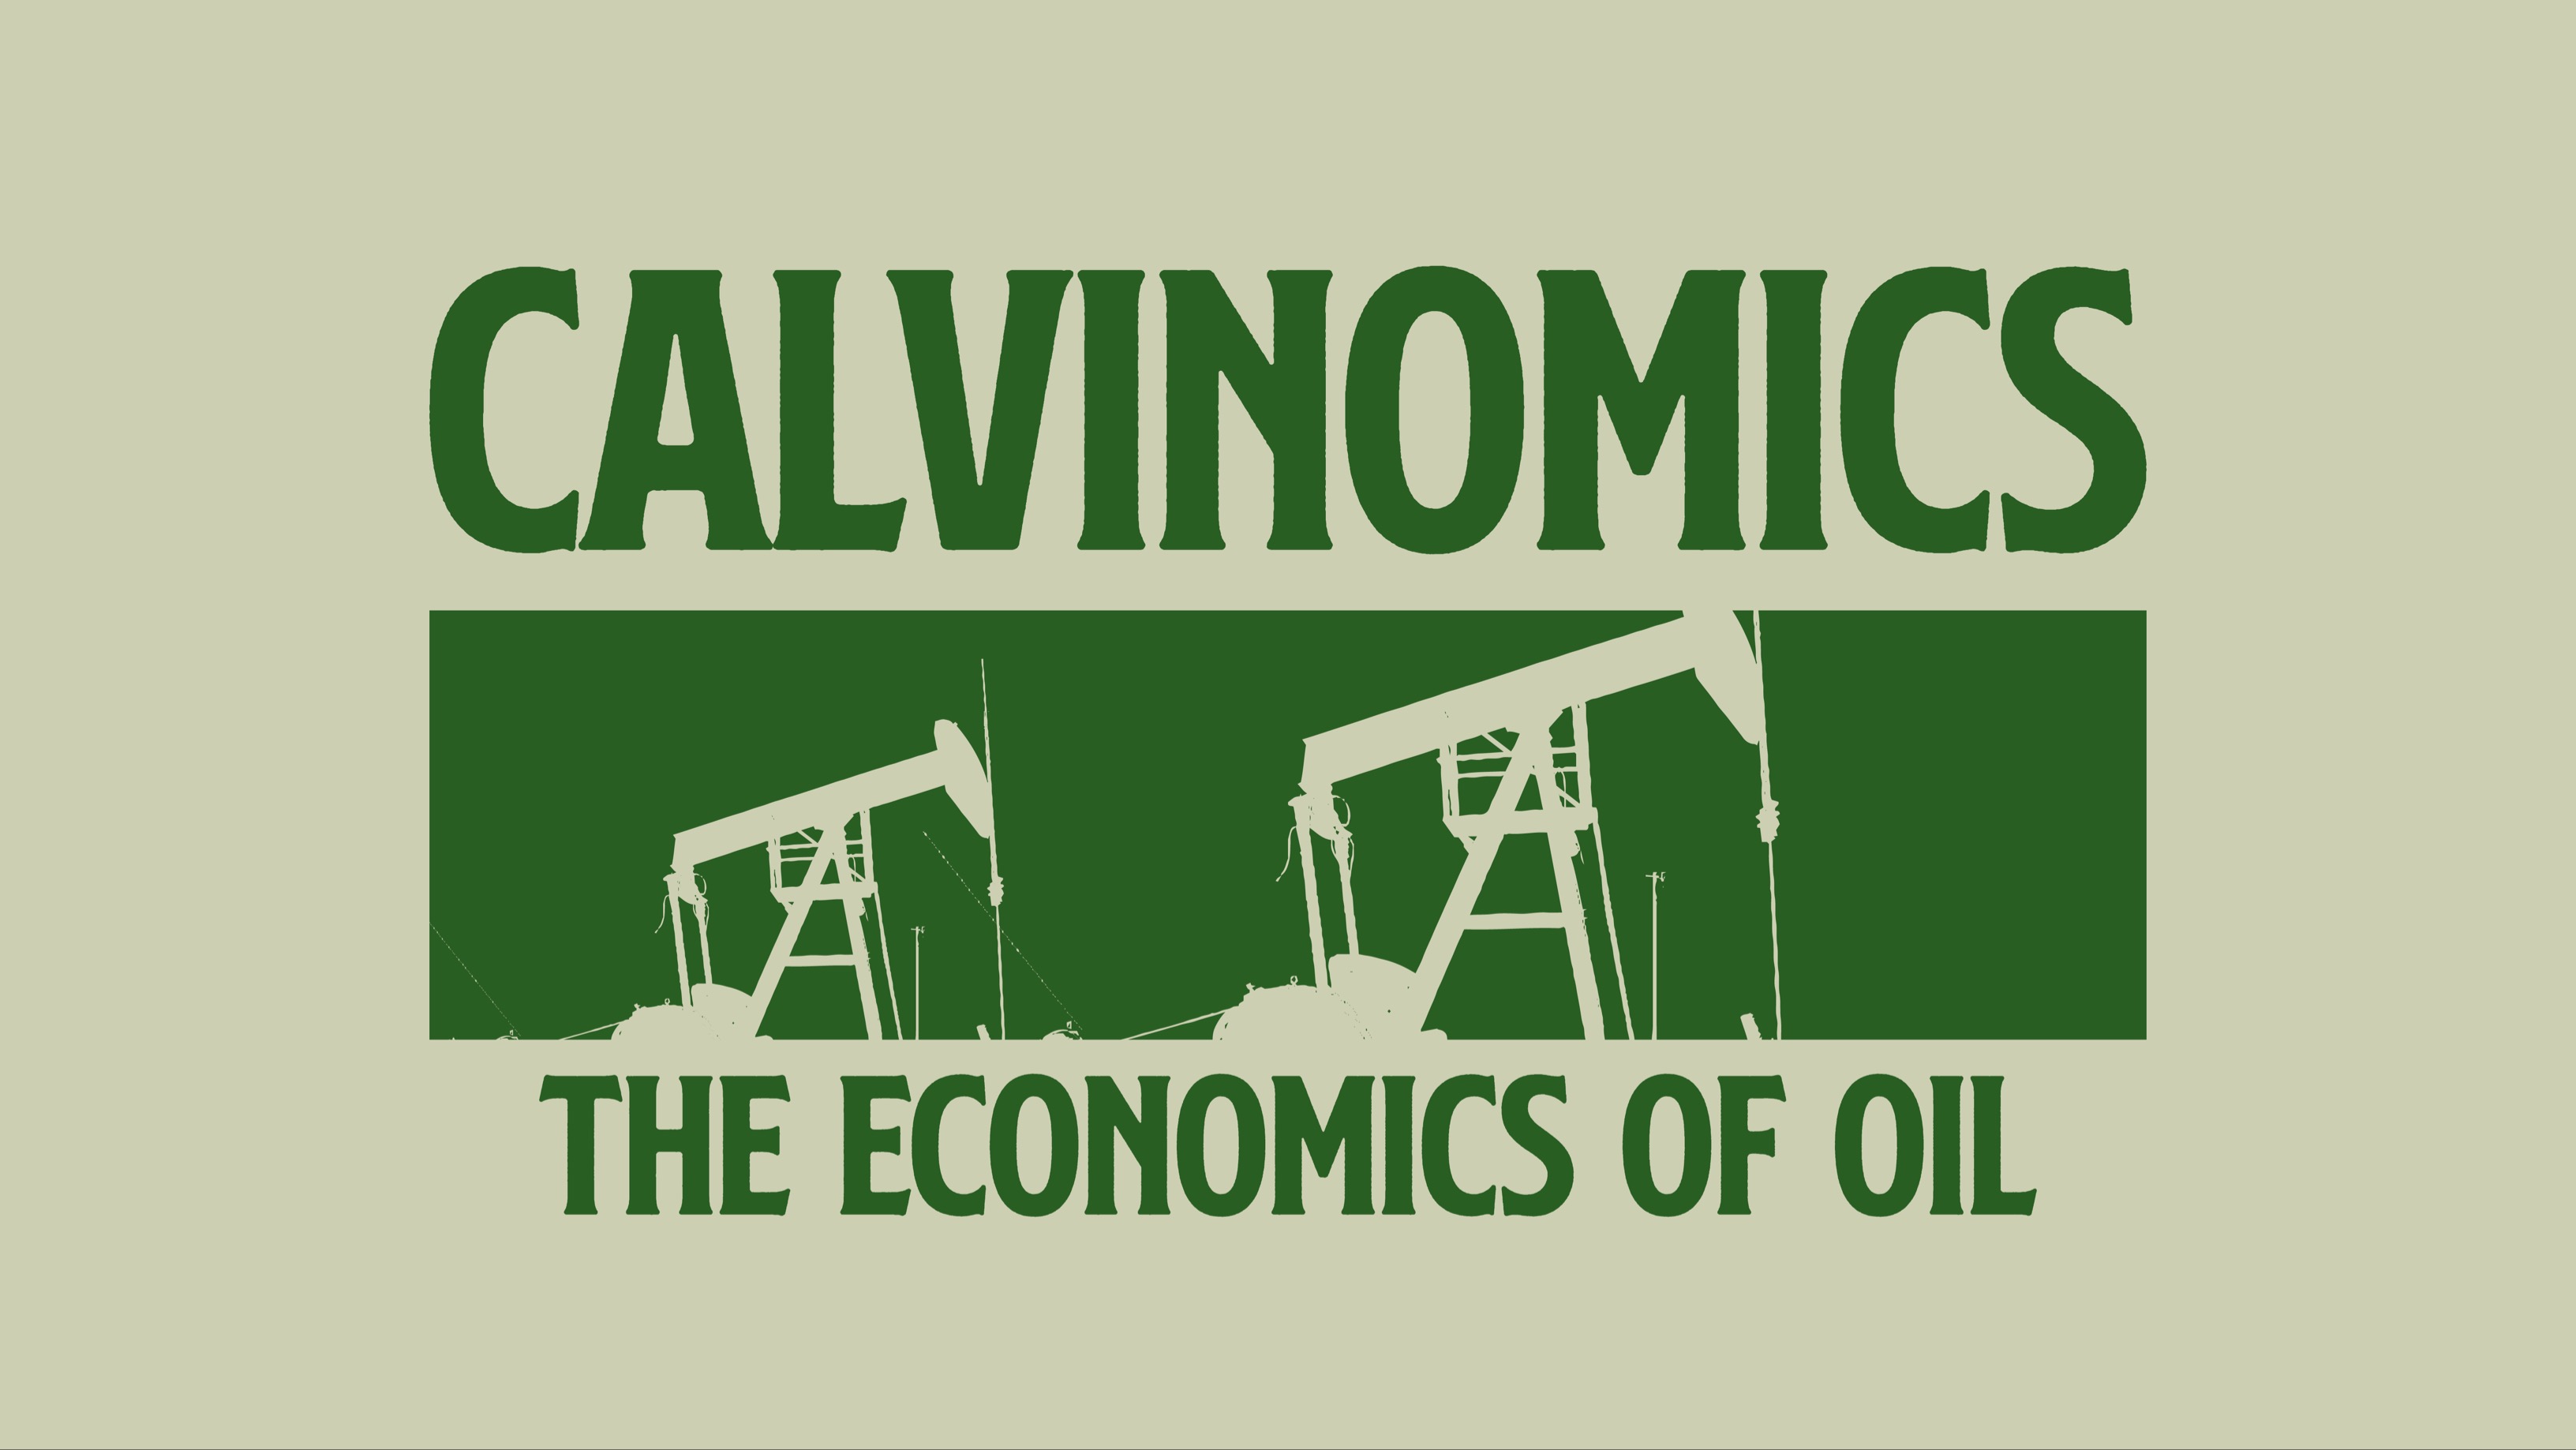 green text on light green background saying Calvinomics the economics of oil with graphic of oil pumps